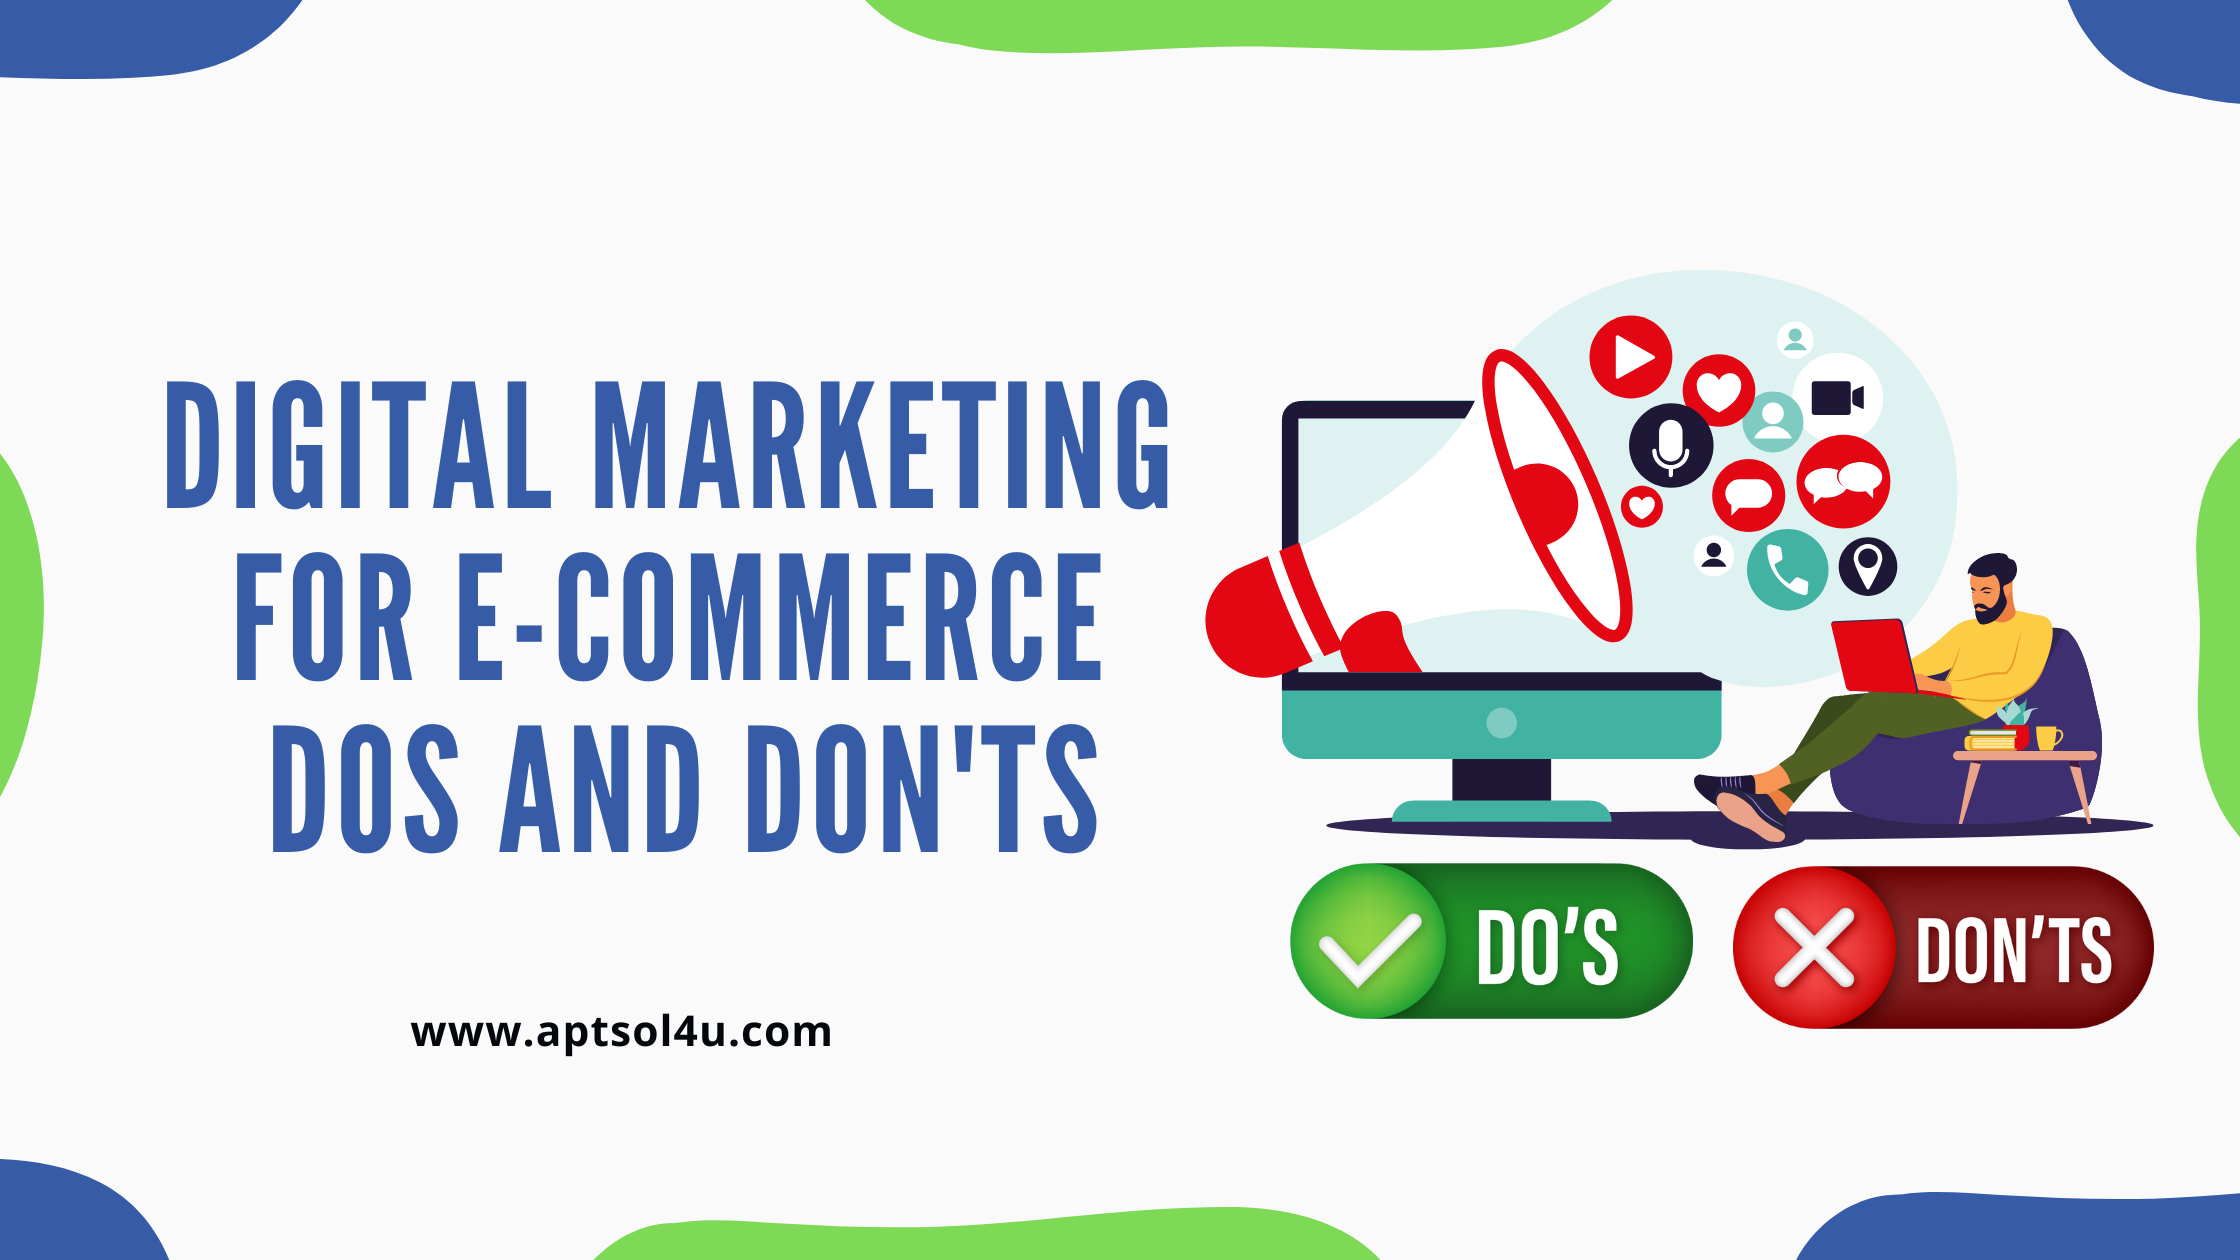 You are currently viewing Digital Marketing for E-Commerce: Dos and Don’ts